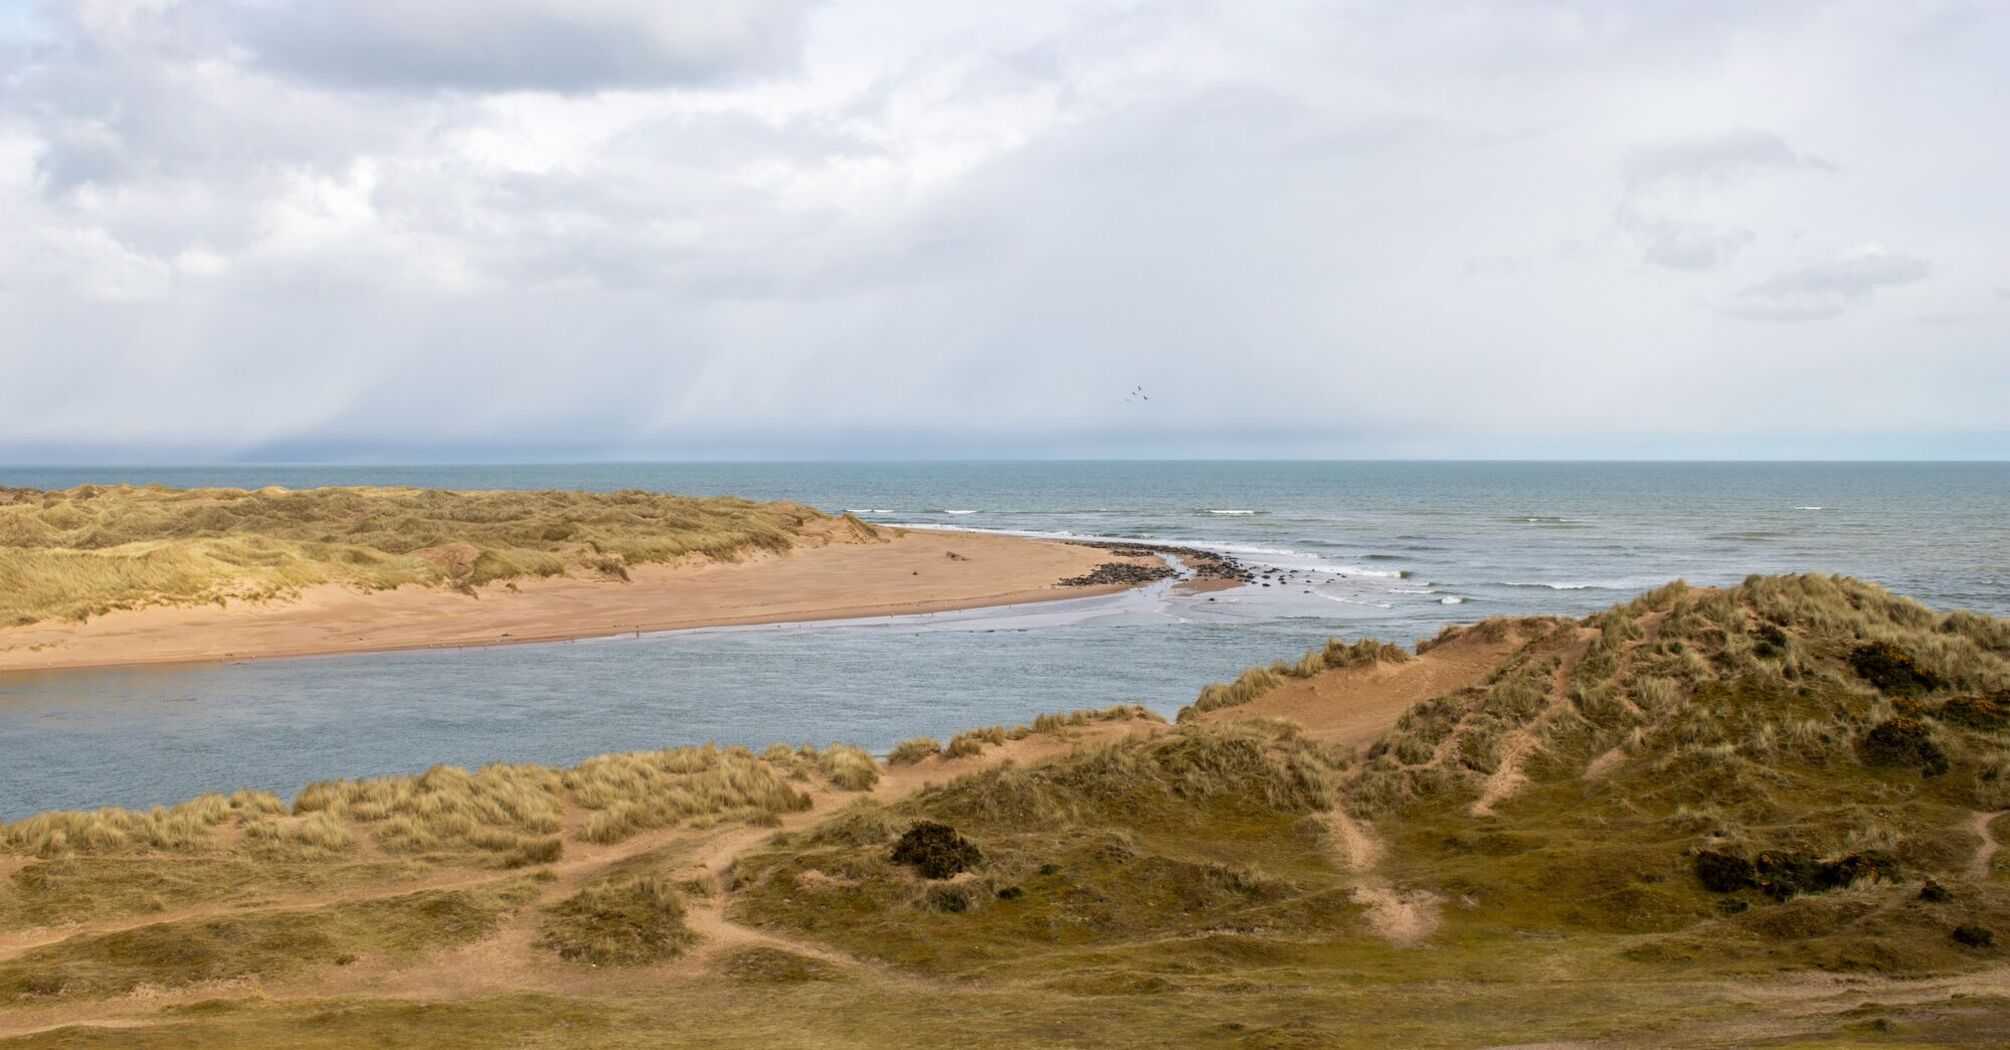 View of Ythan Estuary and the Sands of Forvie from Newburgh Beach, Aberdeenshire